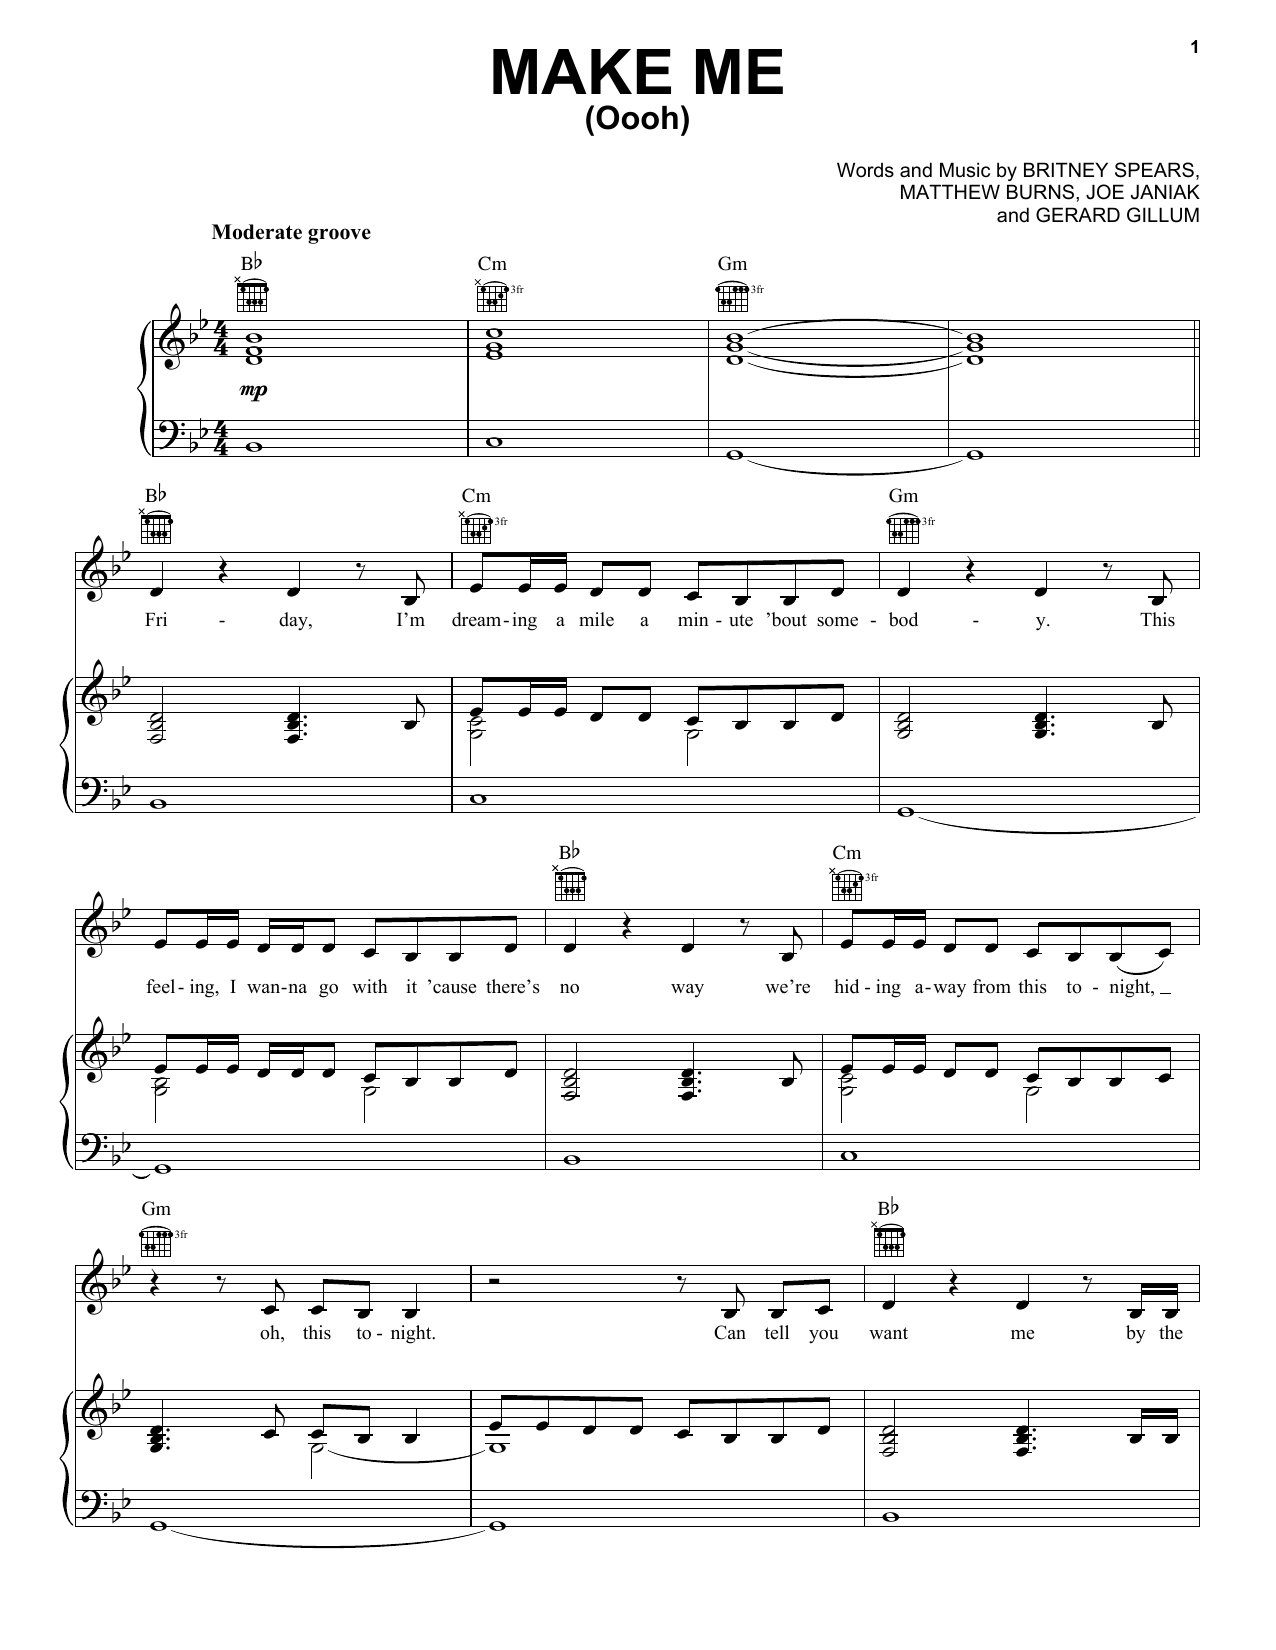 Download Britney Spears Make Me (Oooh) (feat. G-Eazy) Sheet Music